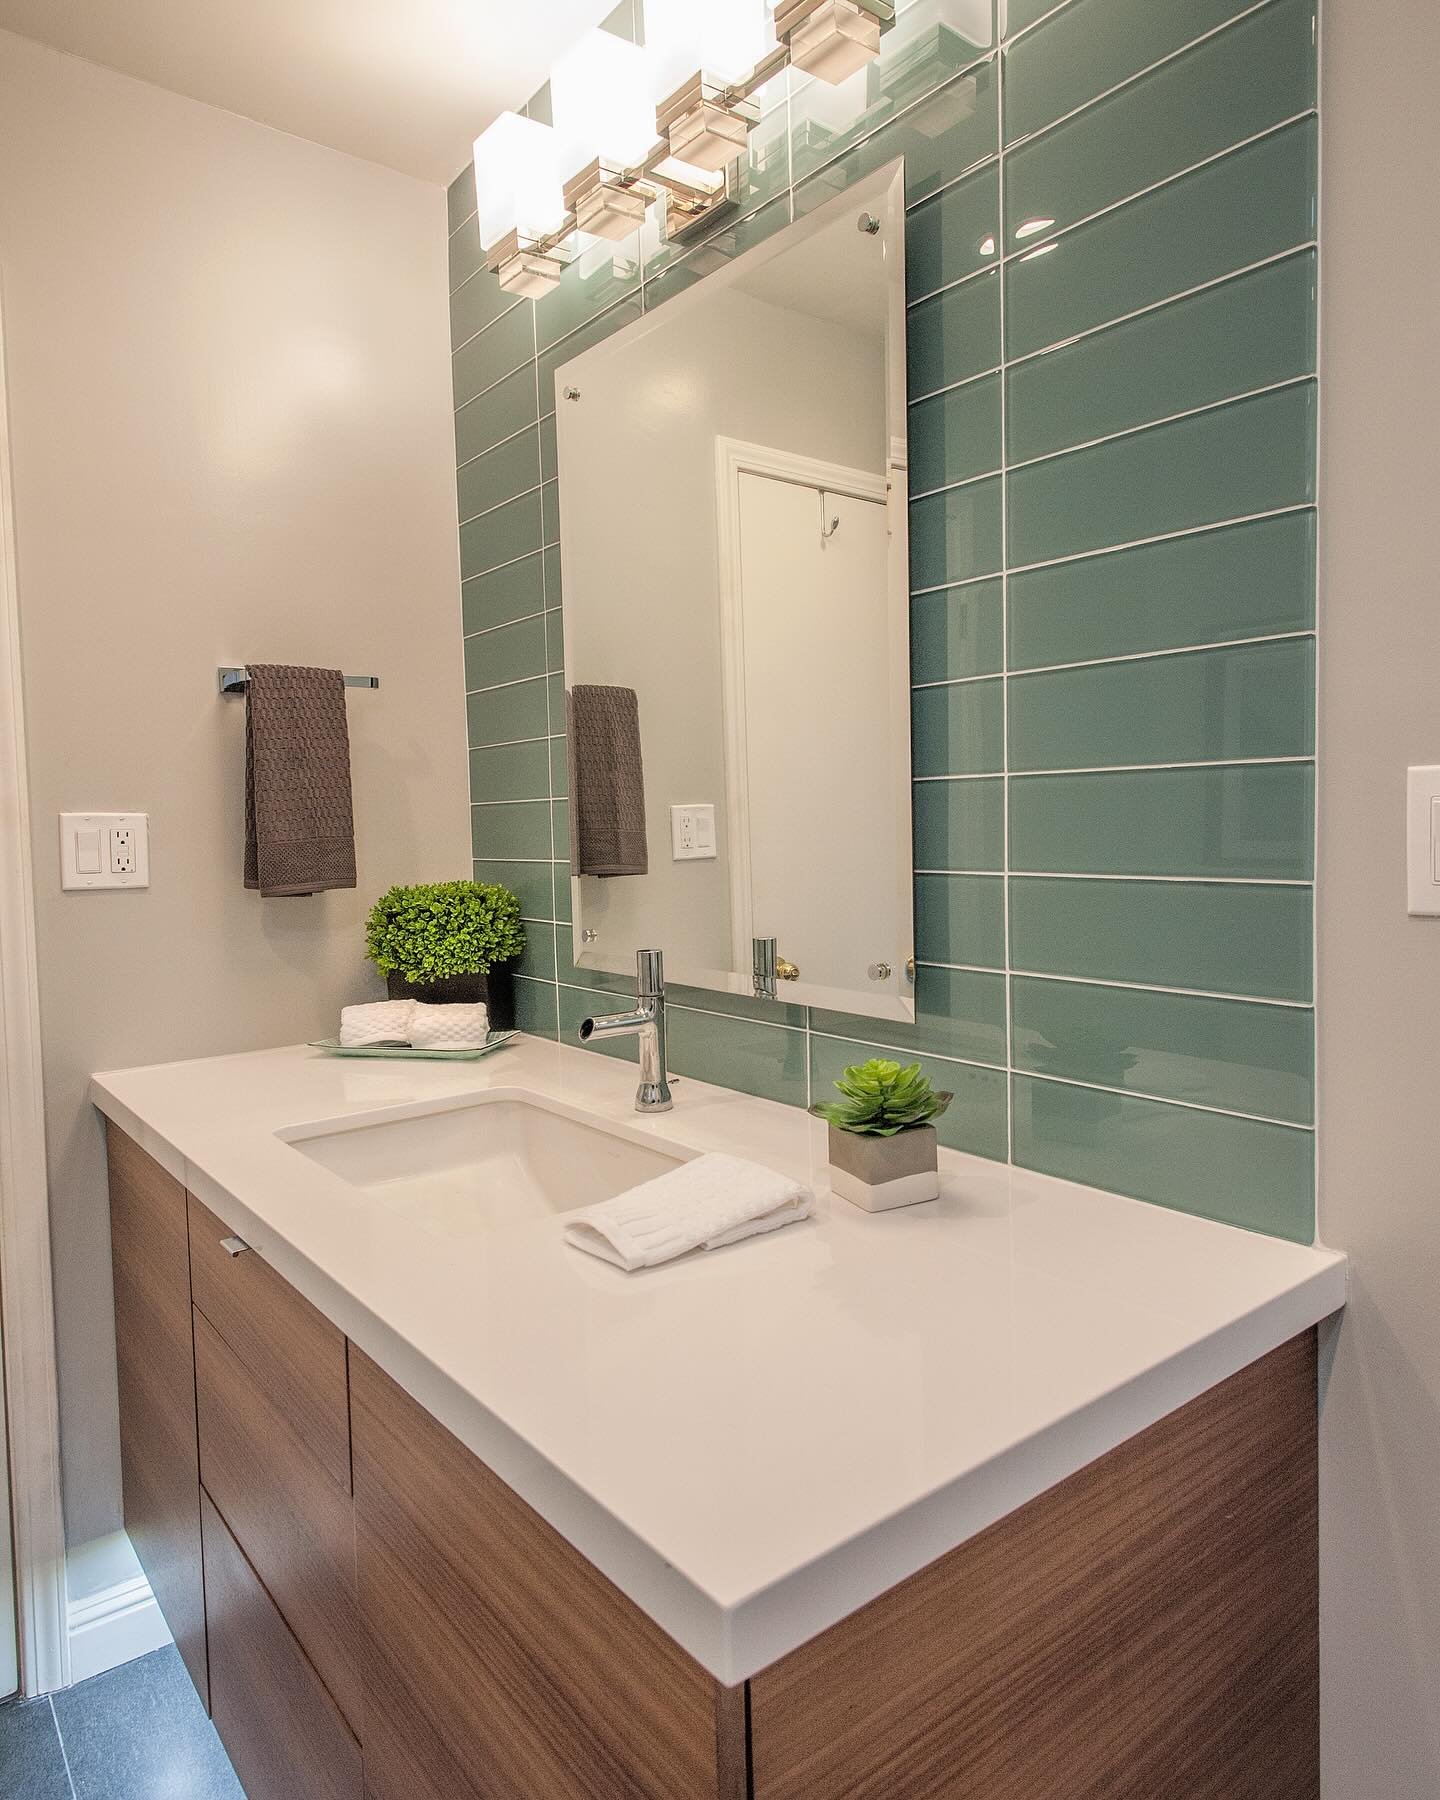 We love how this accent tile adds personality and some reflective dimension to the space!